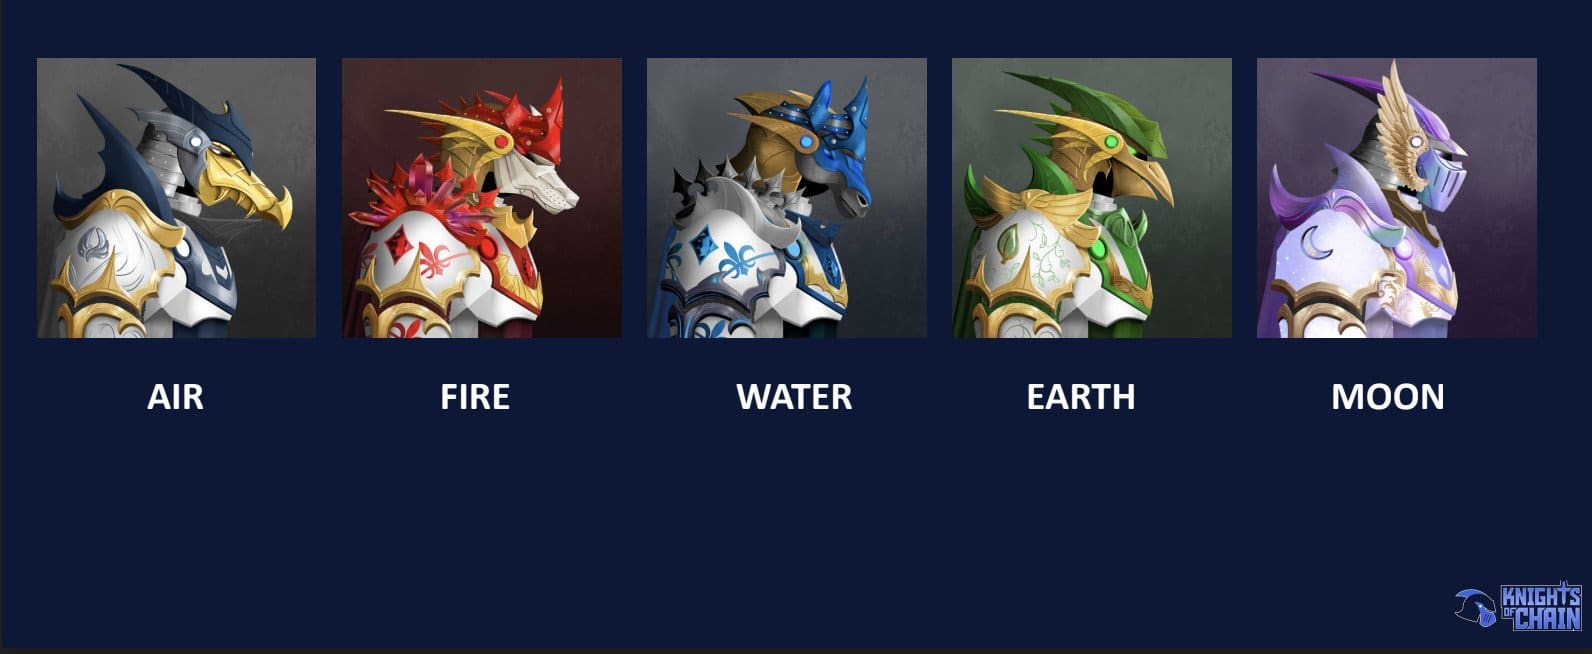 Screenshot from the Knights of Chain website picturing 4 Knights with different elements including fire air water and earth.